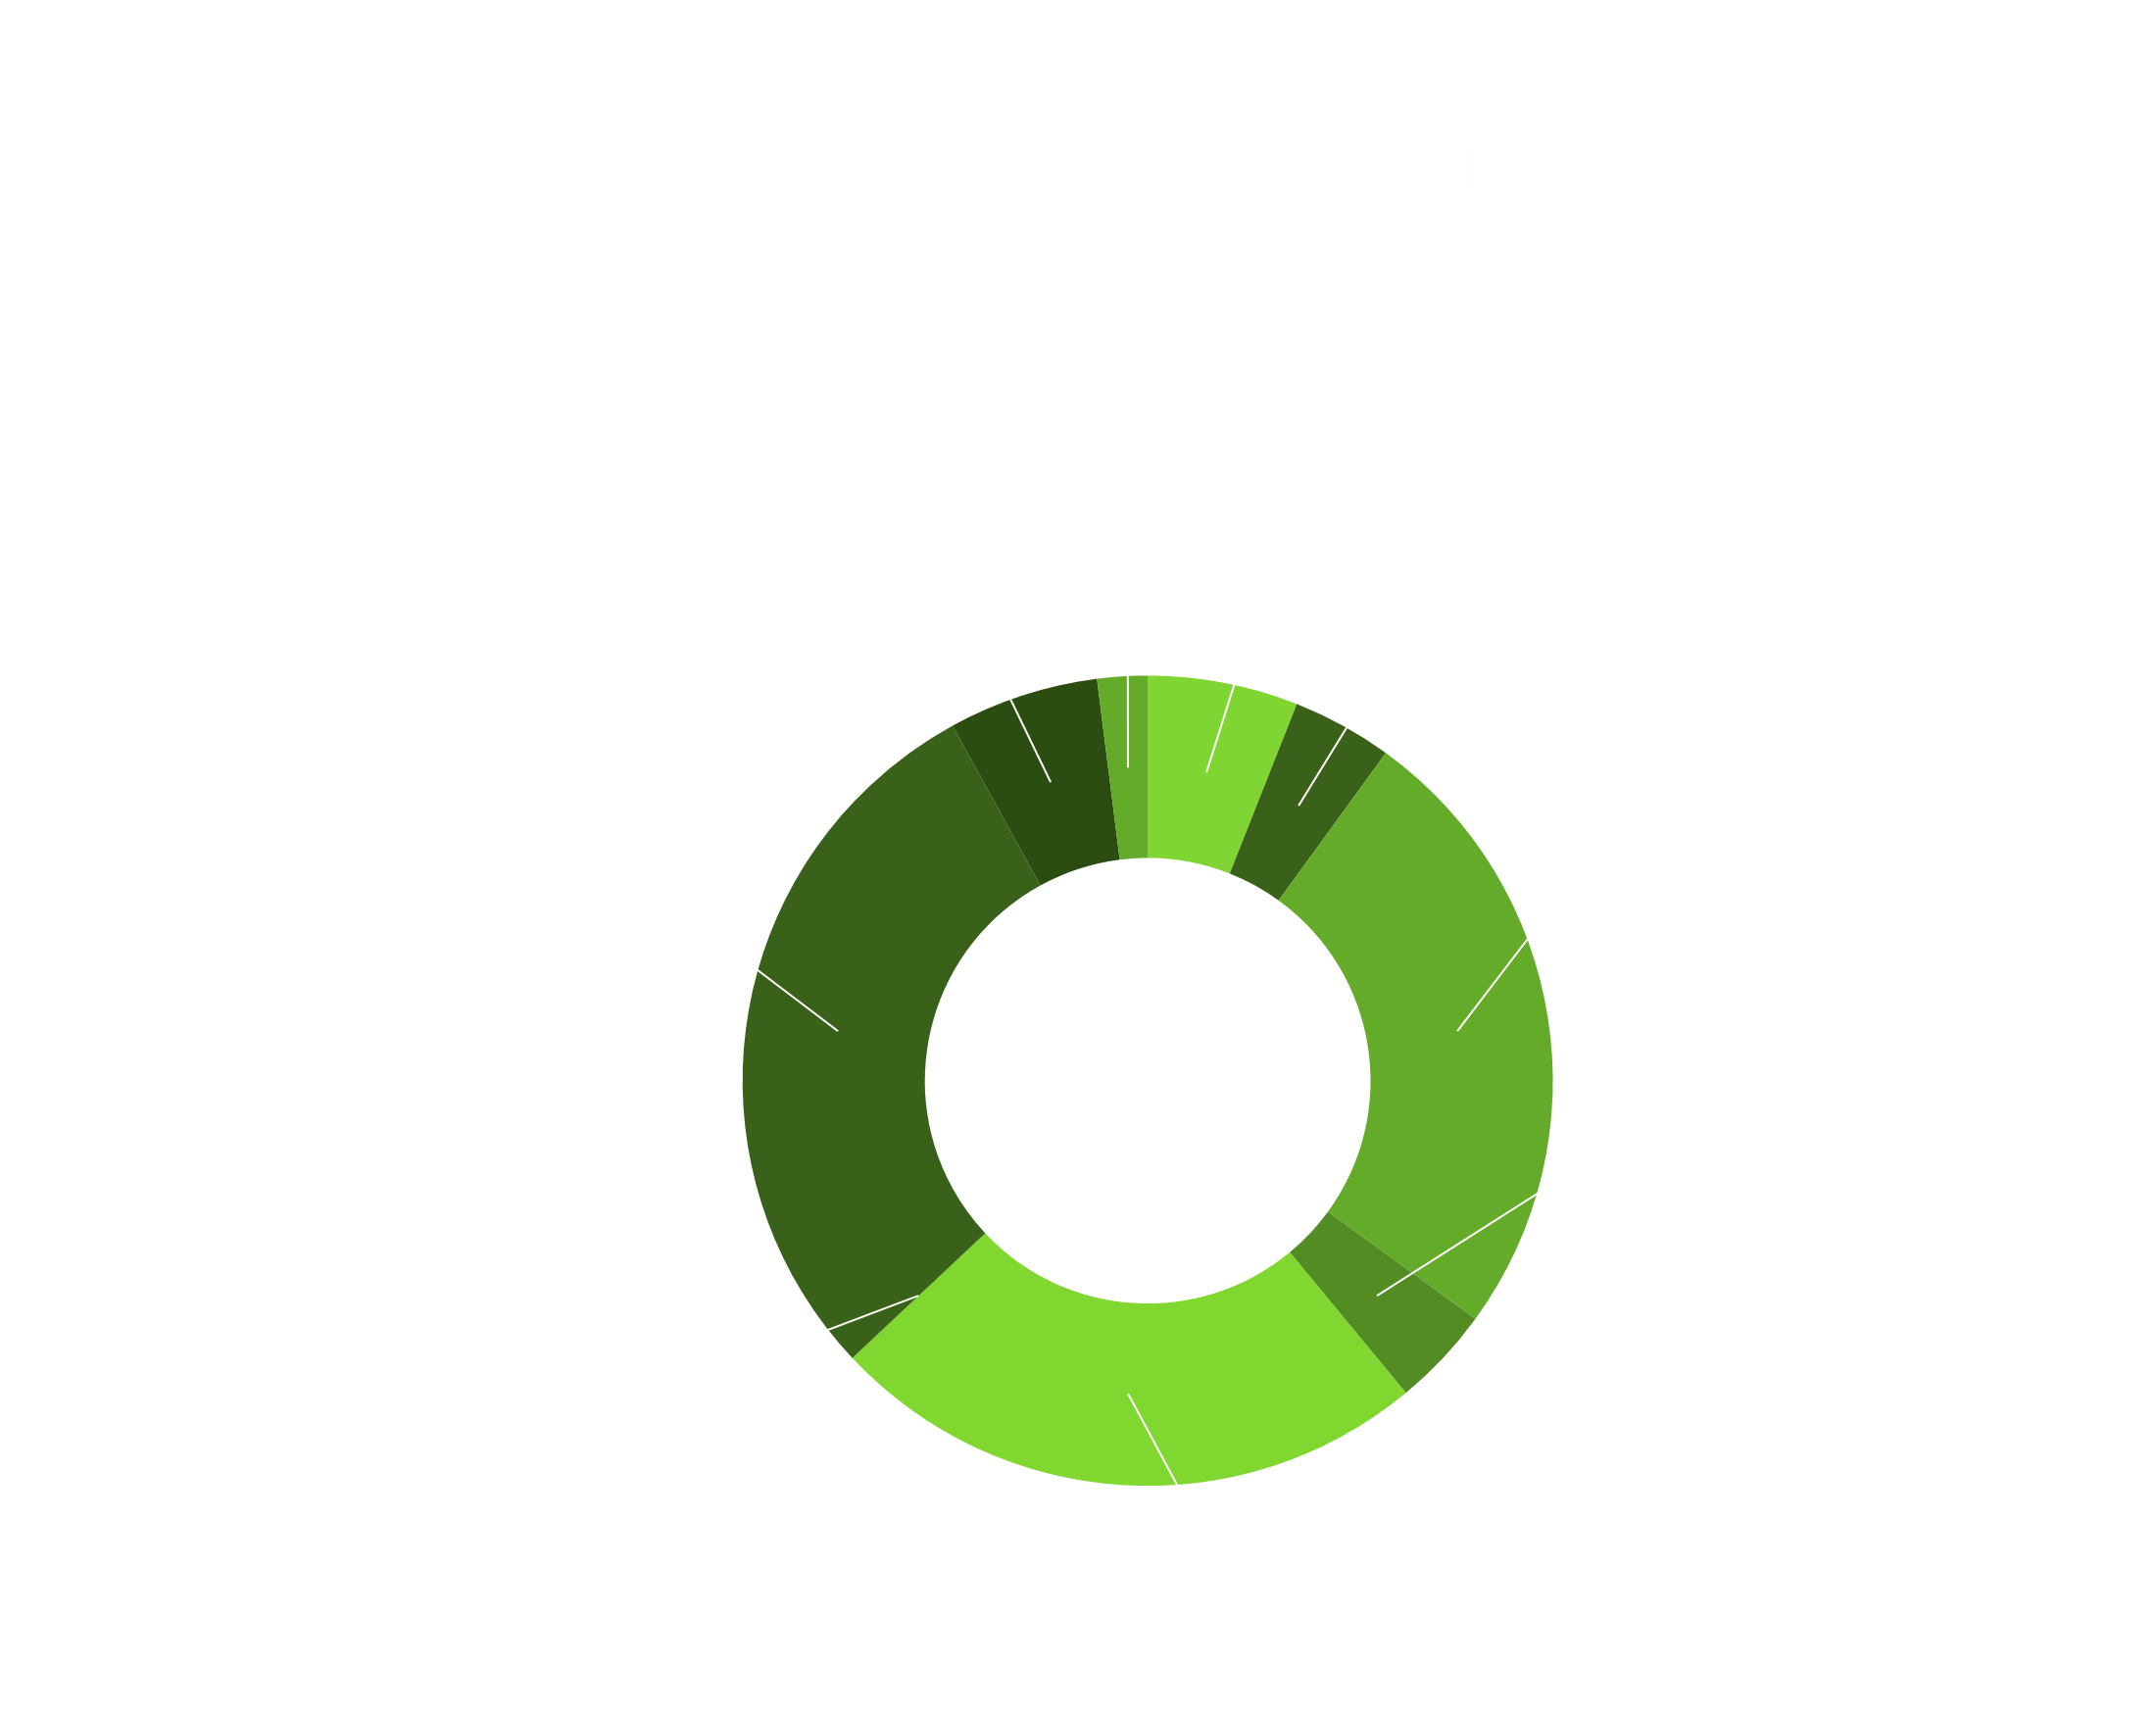 Transportation Fund Estimated Expenditures Fiscal Year 2023 shows 29% B & C Roads, 24% Highway System Construction, 25% Operations Maintenance, 6% Support Services, 6% Transfer to TIF, 4% Region Management, 4% Engineering Services, 2% Other Agencies, and less than 1% Safe Sidewalk